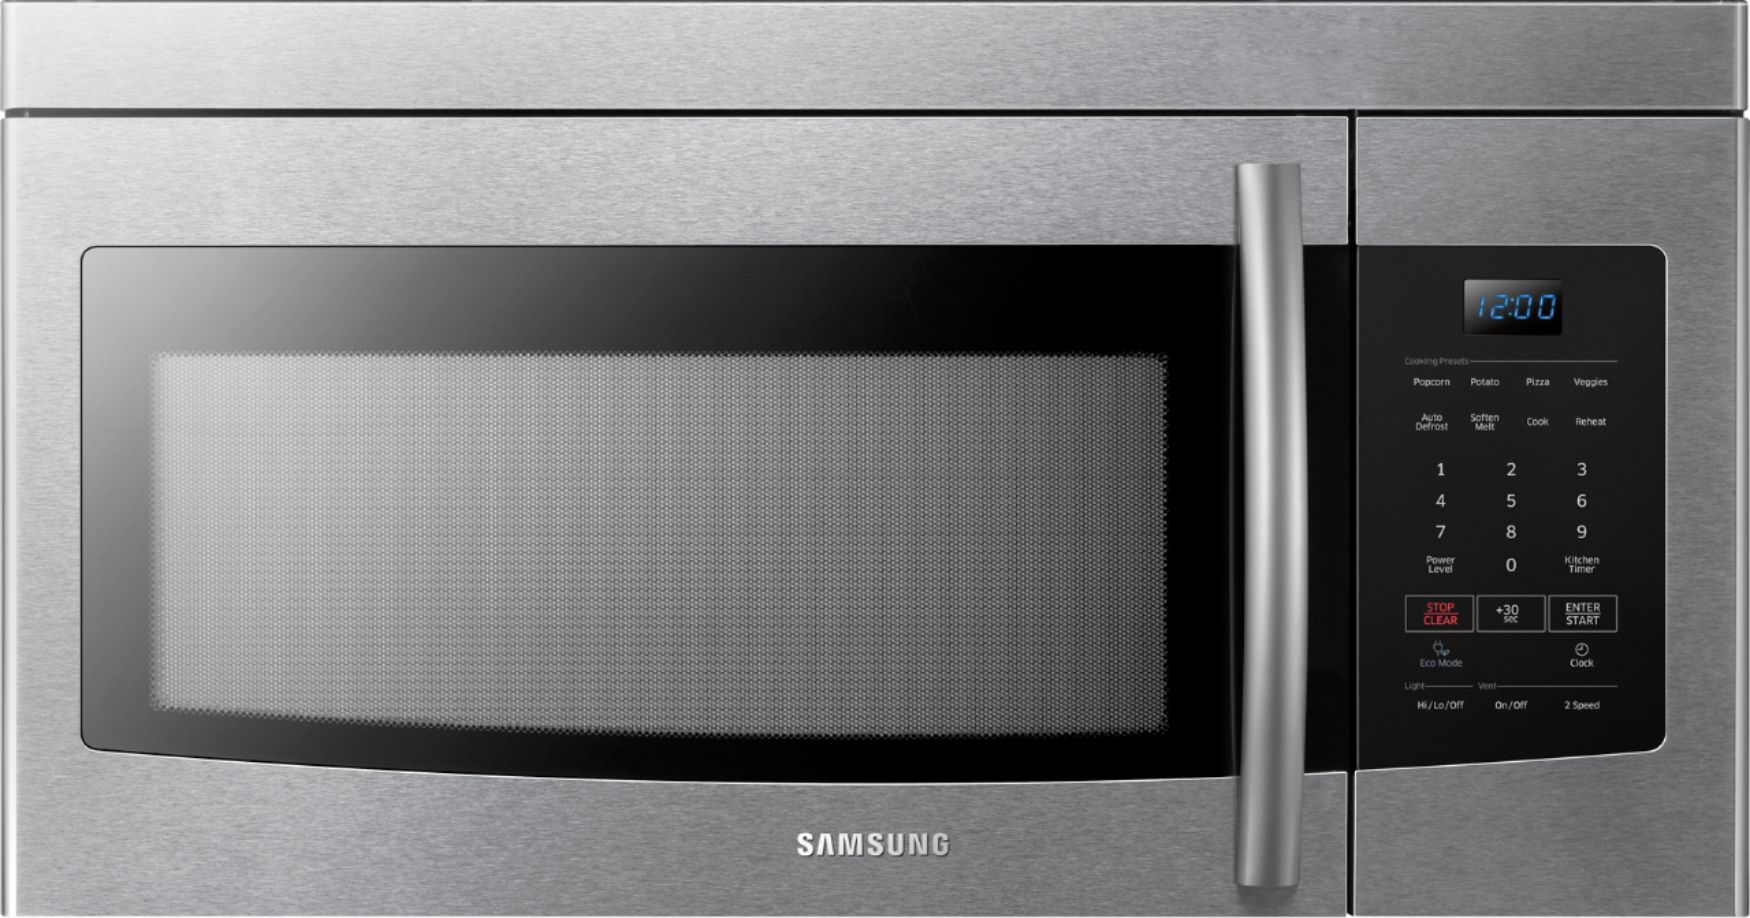 Samsung – 1.6 Cu. Ft. Over-the-Range Microwave – Stainless steel